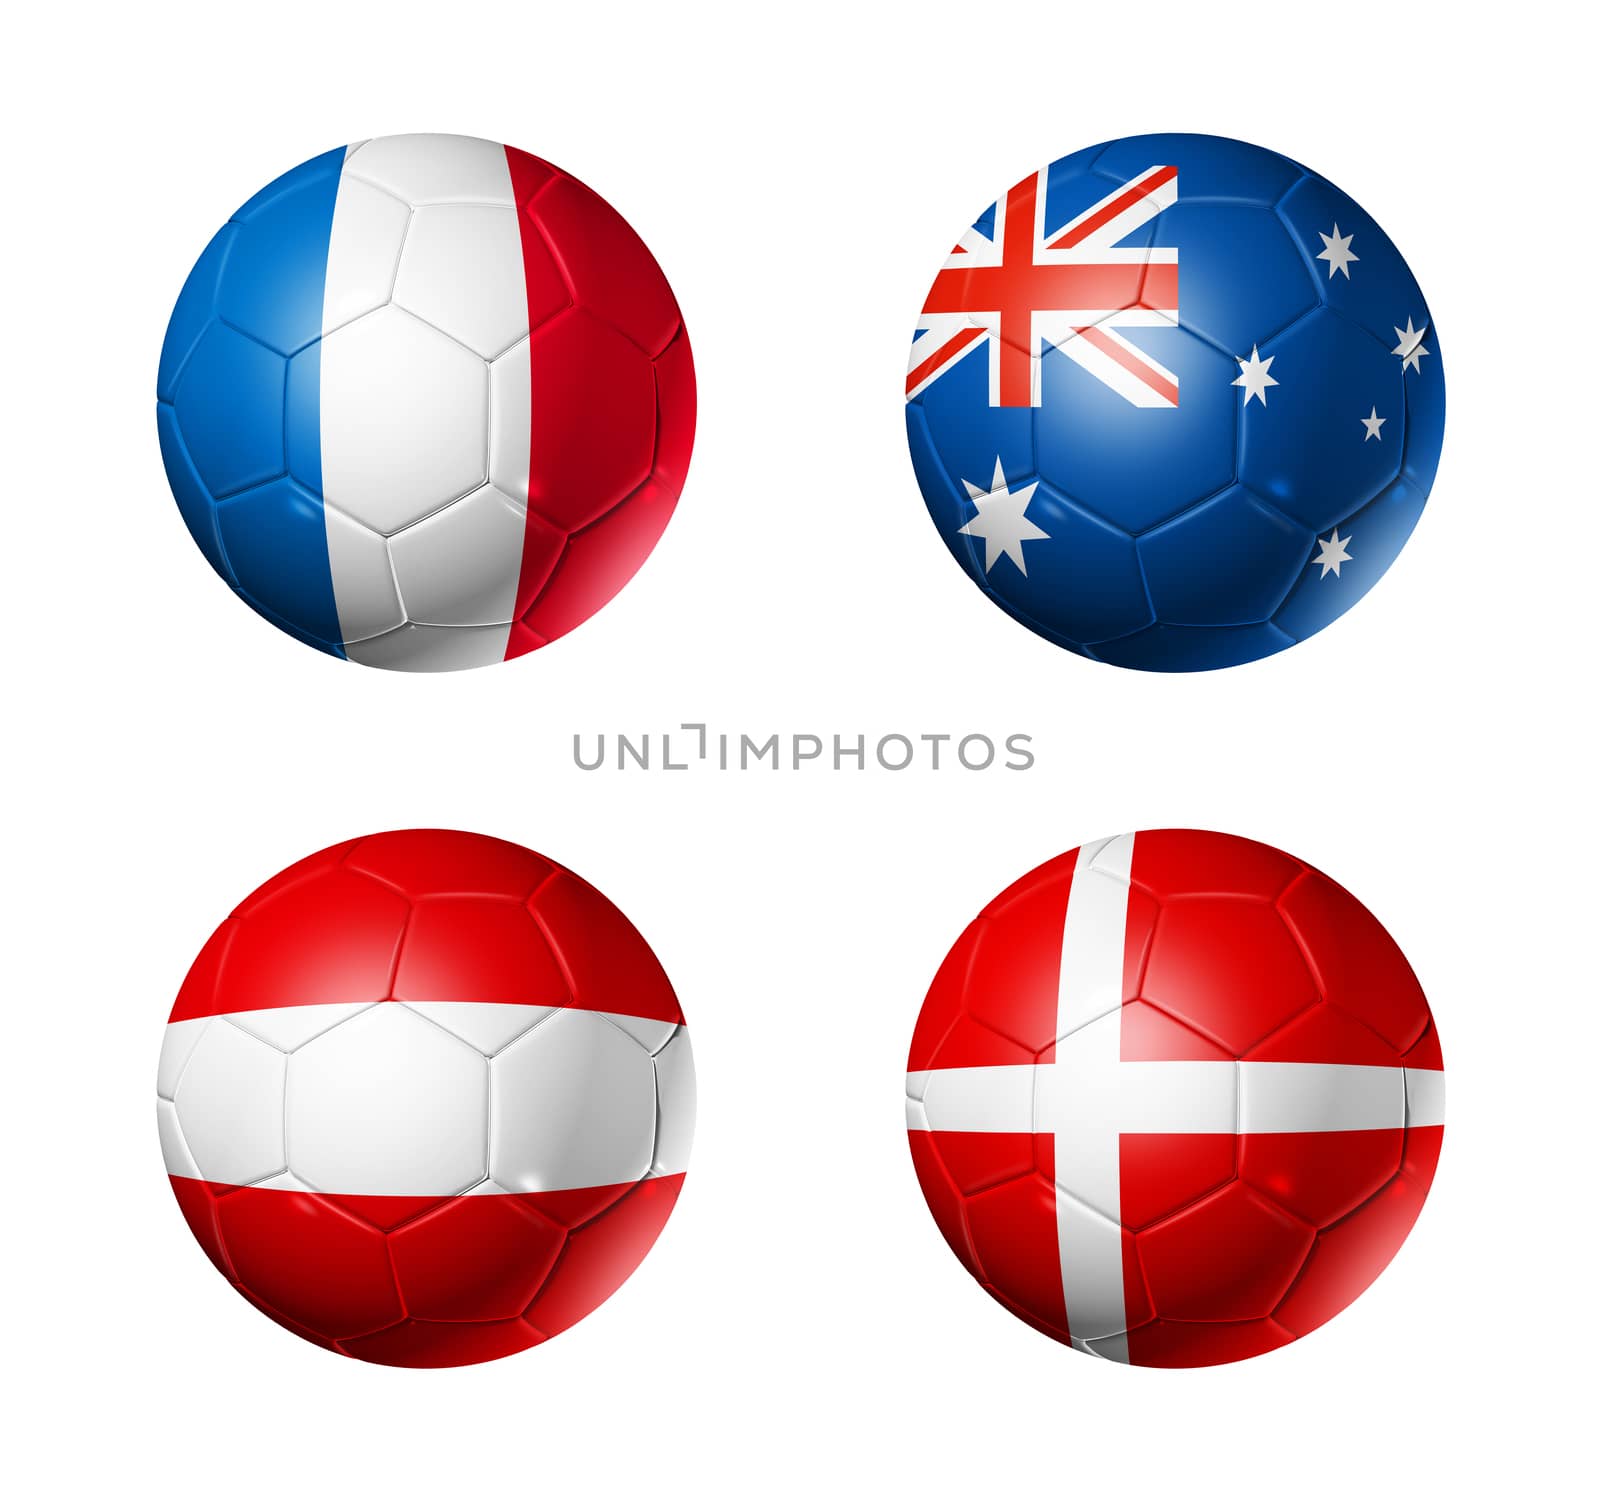 Russia football 2018 group C flags on soccer balls by daboost